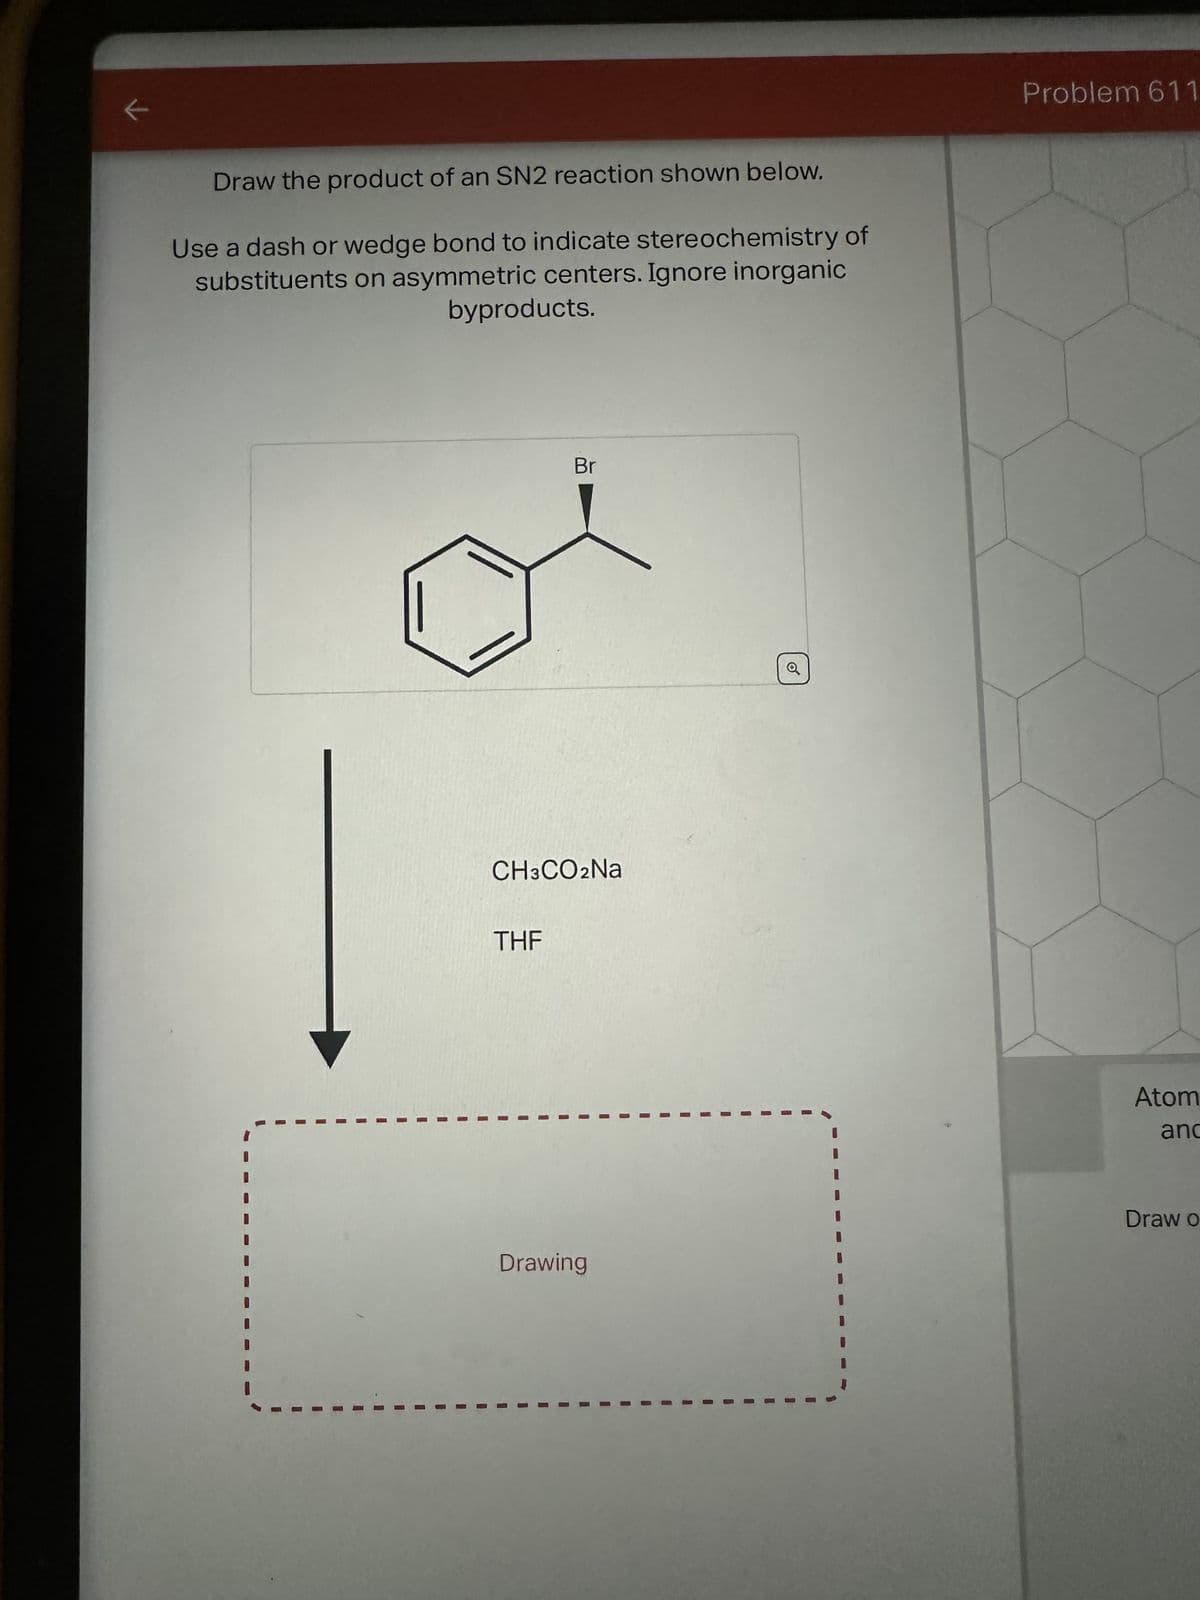 Draw the product of an SN2 reaction shown below.
Use a dash or wedge bond to indicate stereochemistry of
substituents on asymmetric centers. Ignore inorganic
byproducts.
I
I
CH3CO2Na
THF
I
1
Br
I
Drawing
Problem 611
Atom
anc
Draw o